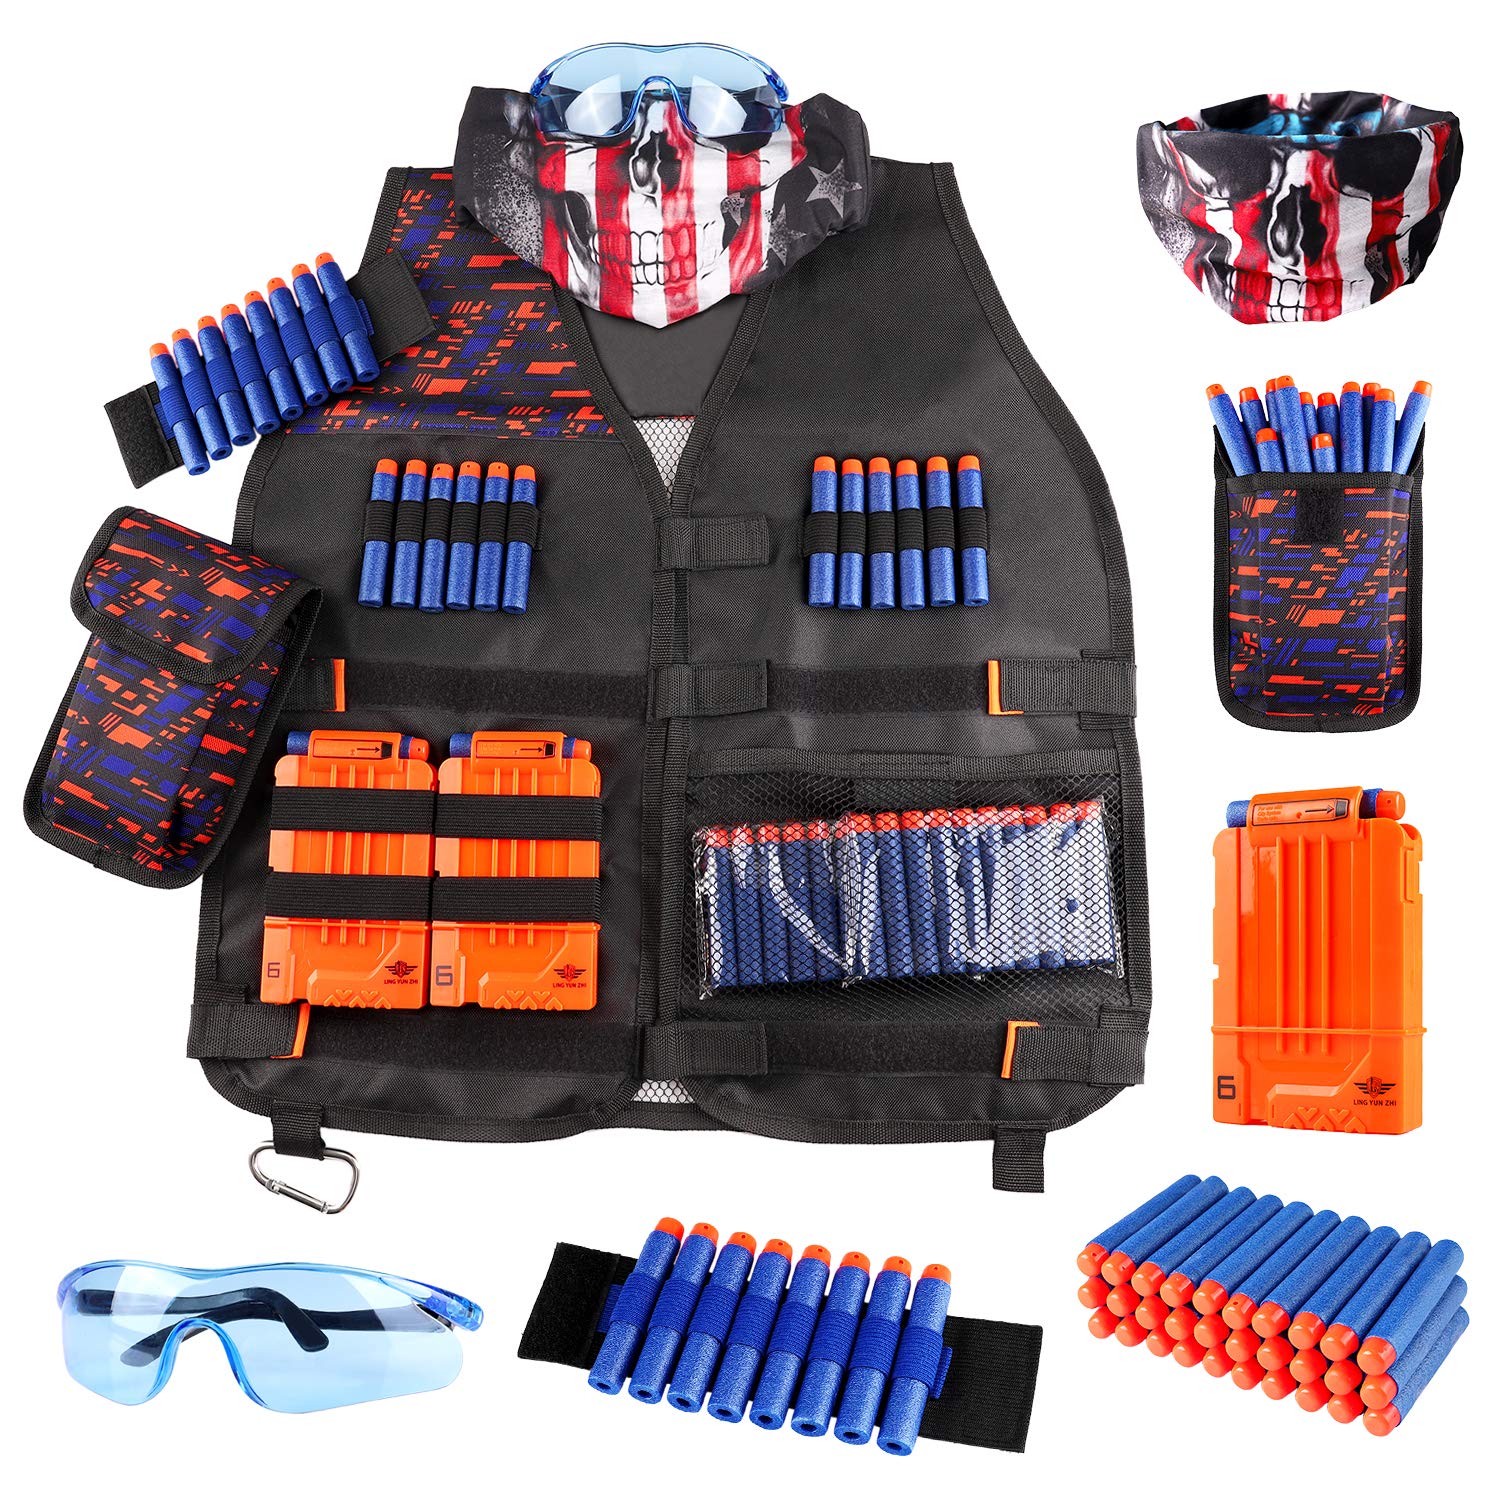 Kids Tactical Vest Kit for Nerf Guns N-Strike Elite Series with Refill Darts Dart Pouch, Reload Clip Tactical Mask Wrist Band and Protective Glasses for kids Boys & girls